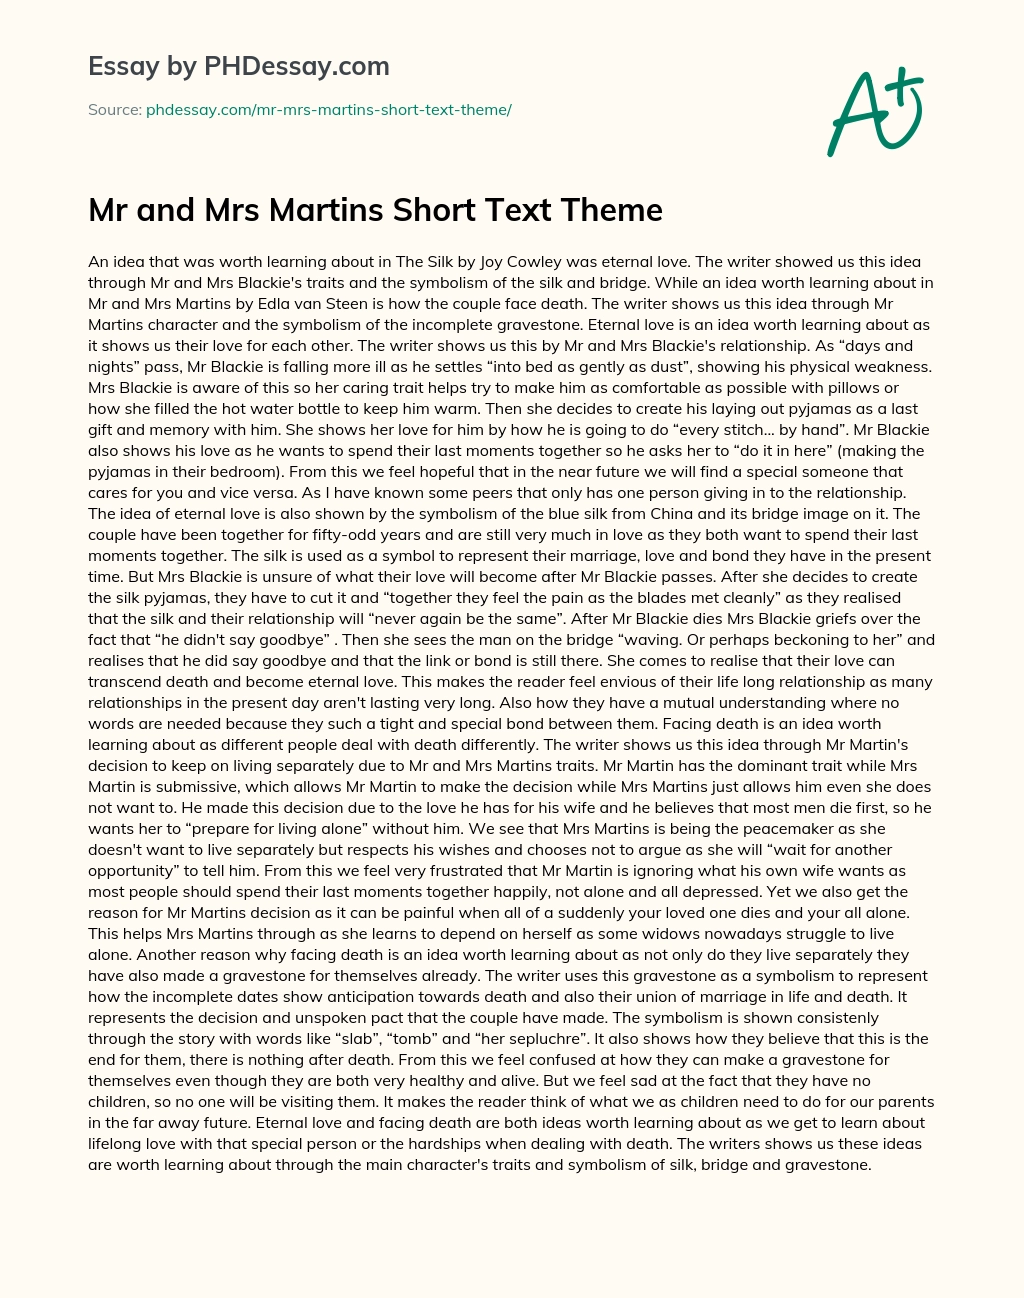 Mr and Mrs Martins Short Text Theme essay